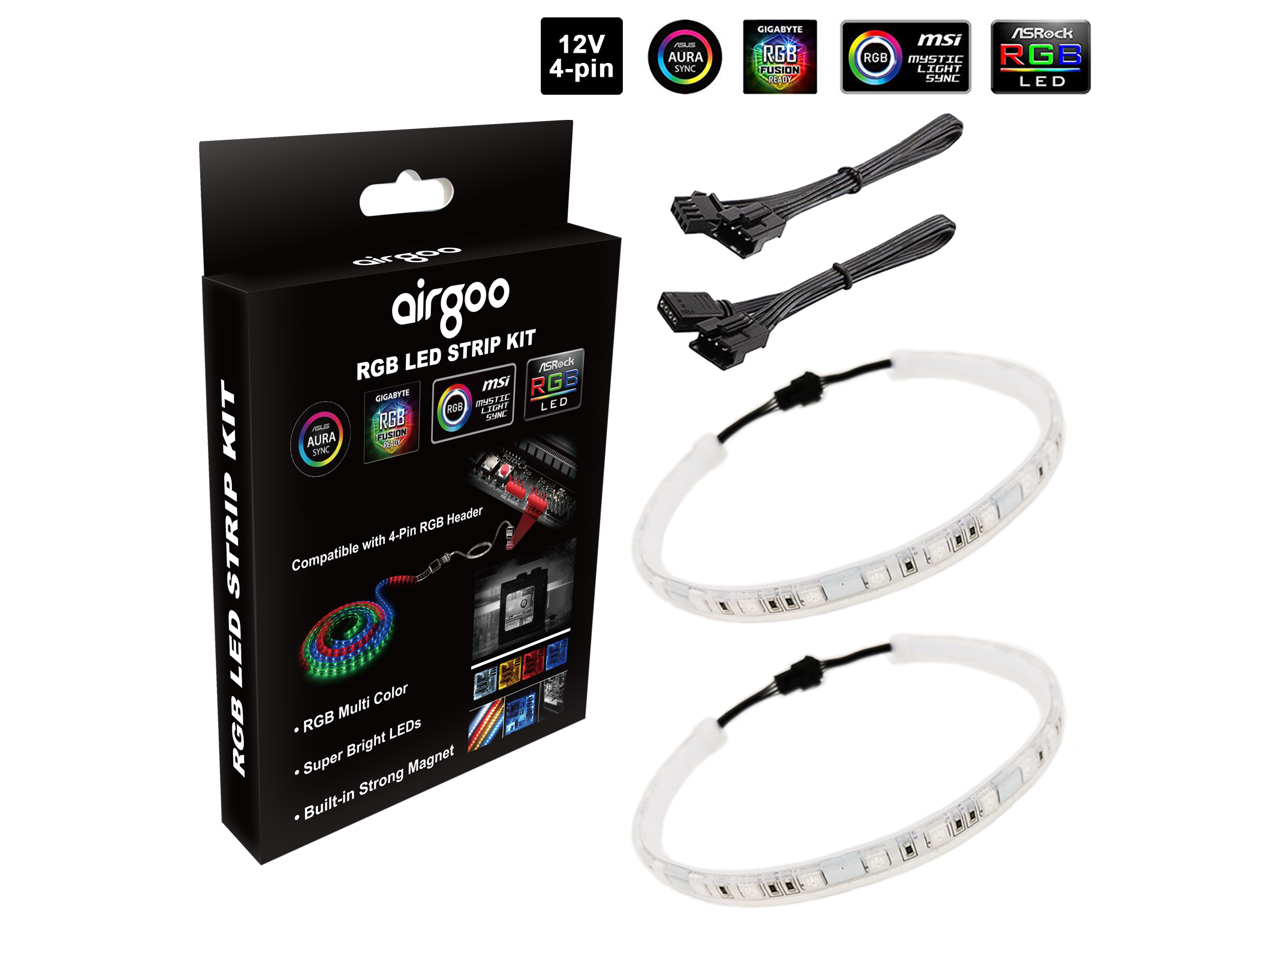 PC LED Strip RGB Lighting with Remote ControllerSATA Connector4 Pin 4-pin